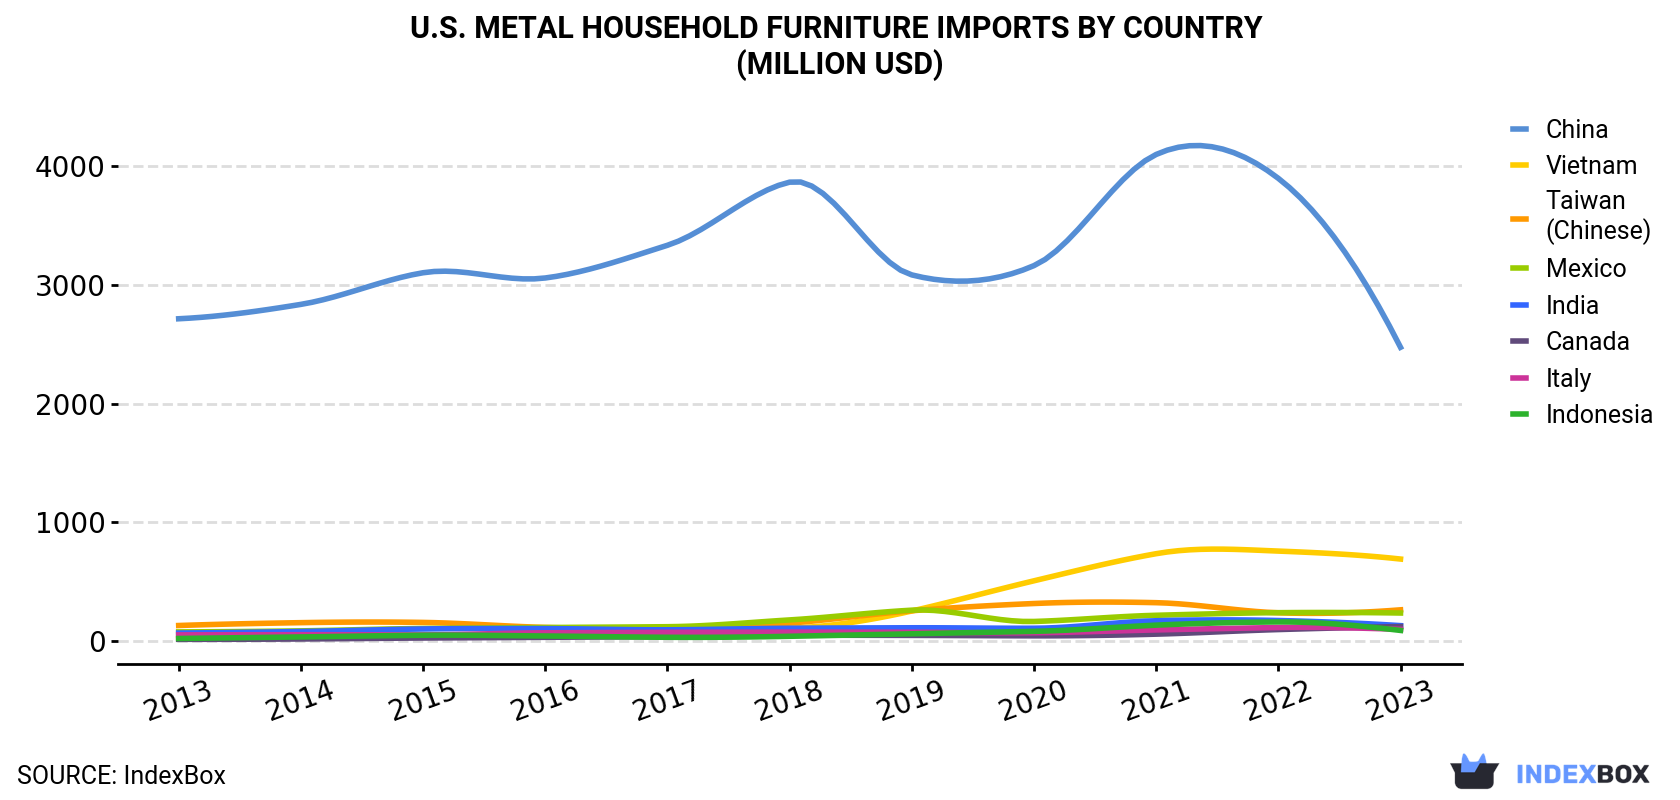 U.S. Metal Household Furniture Imports By Country (Million USD)